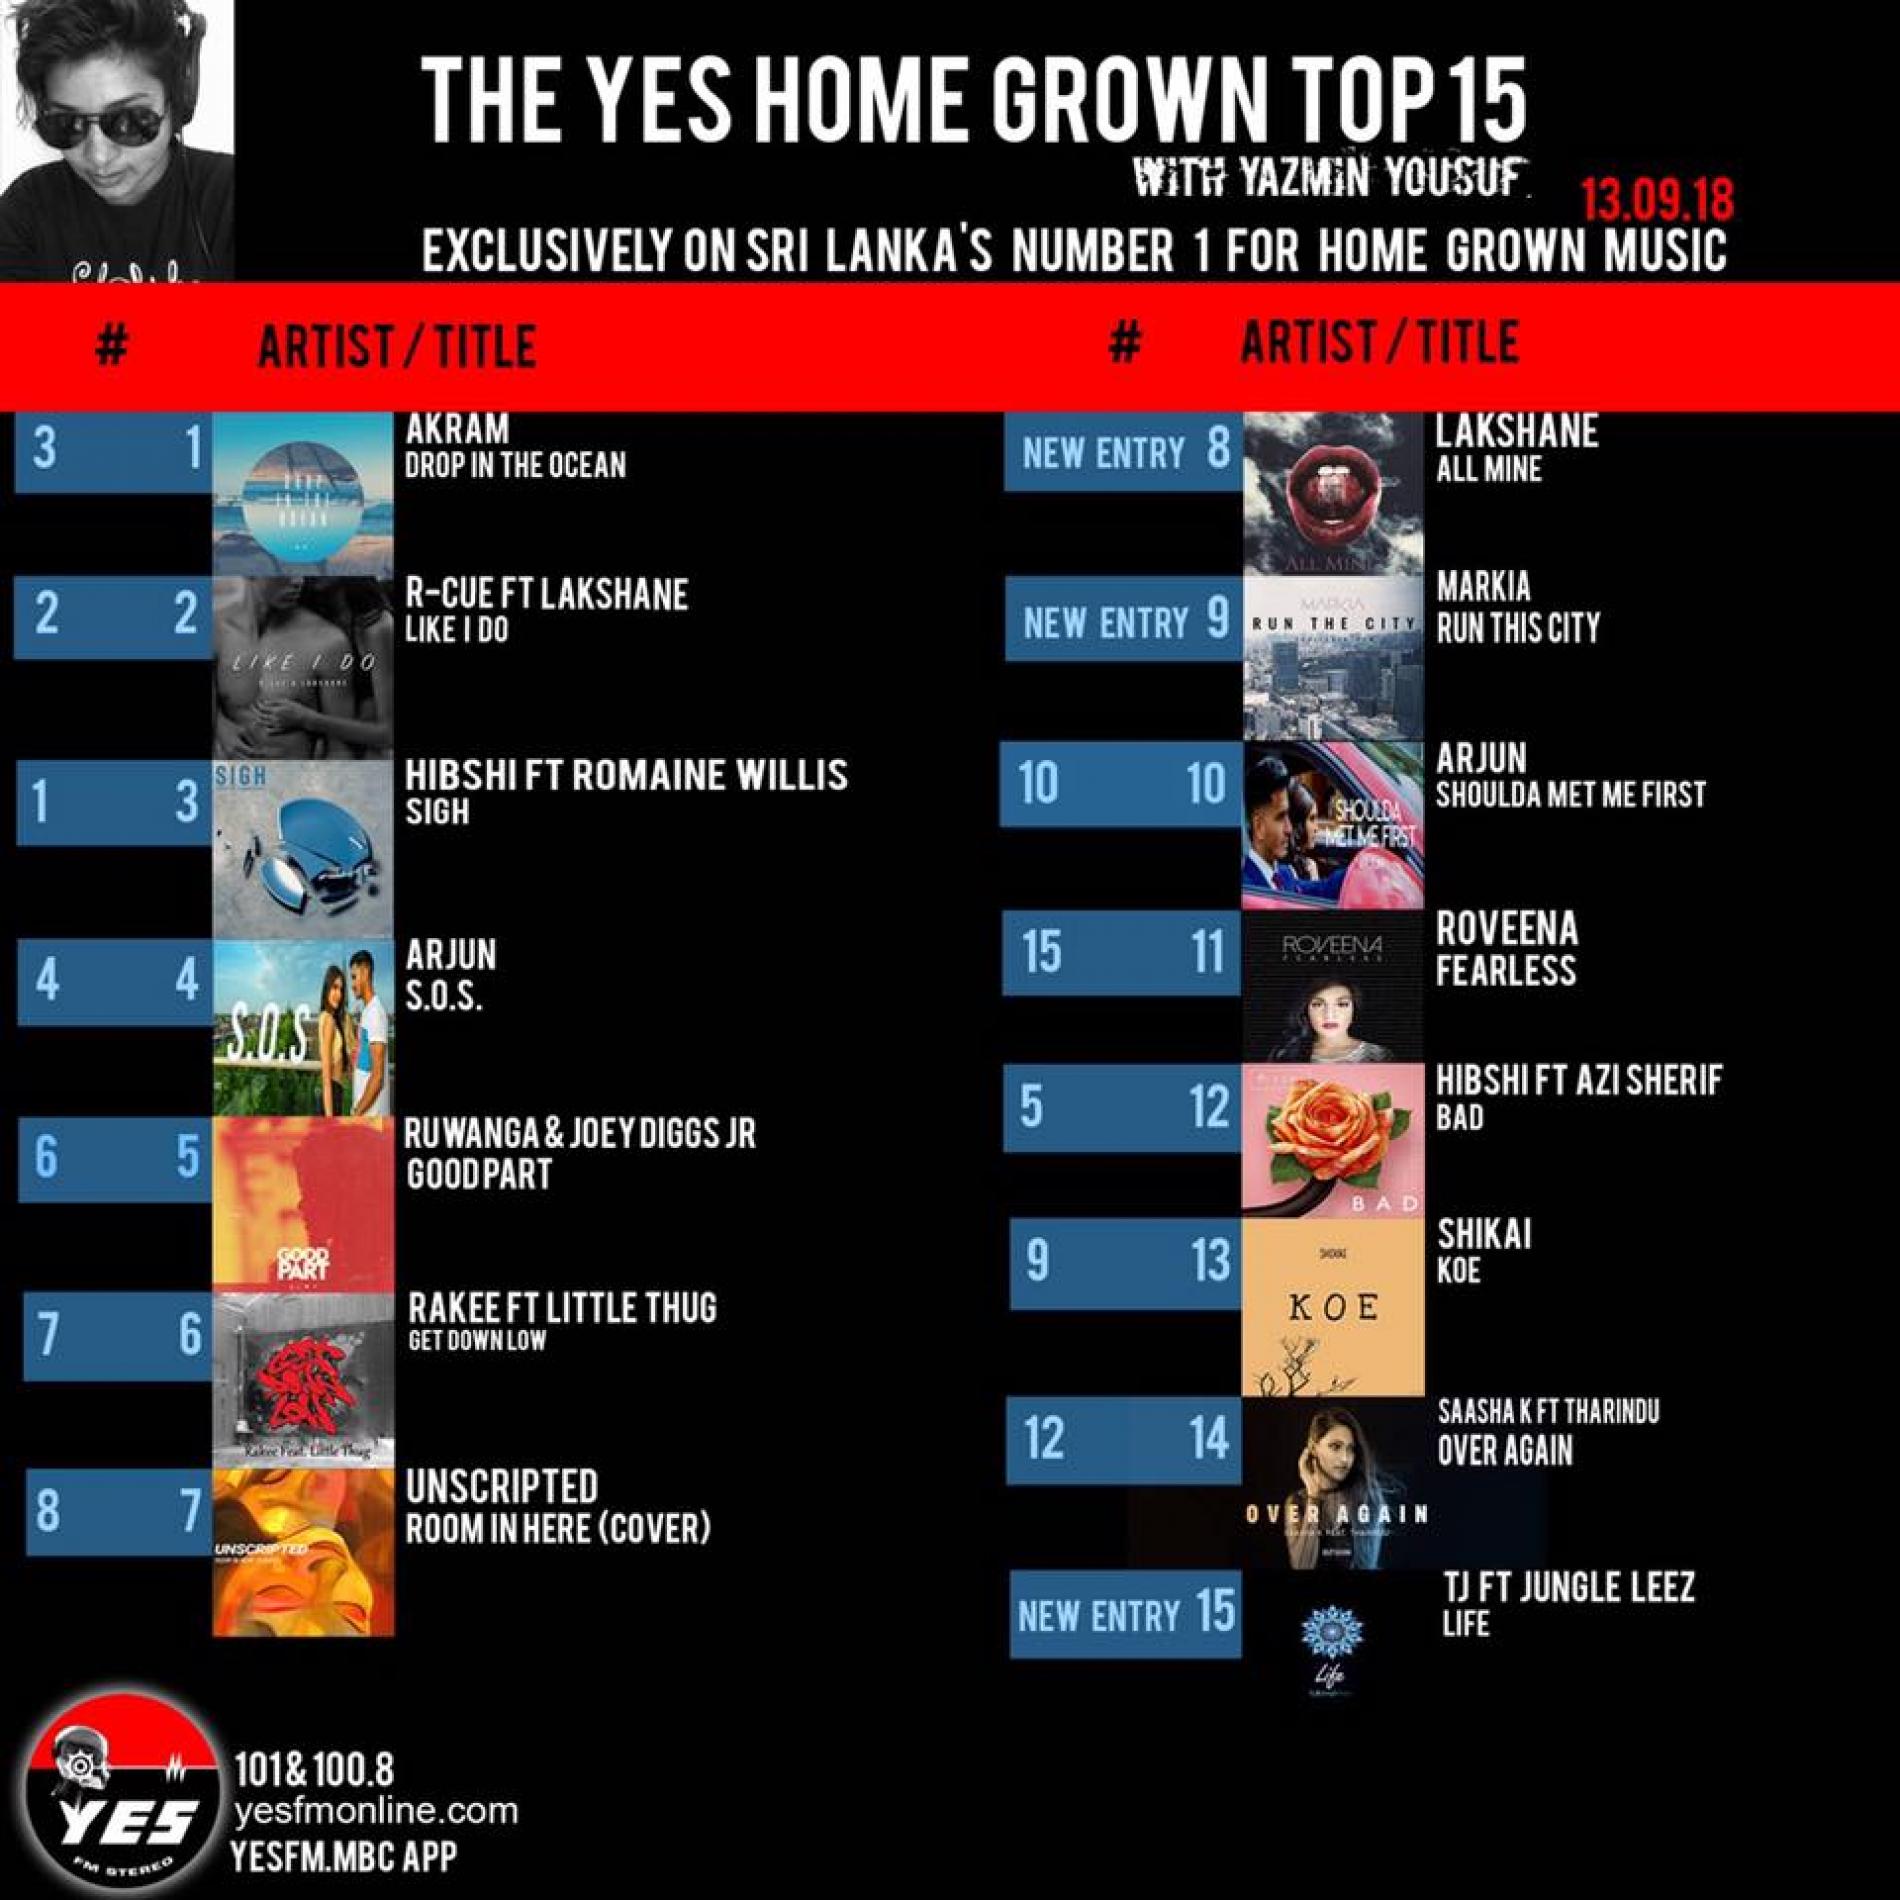 Akram Hits Number 1 On The YES Home Grown Top 15!